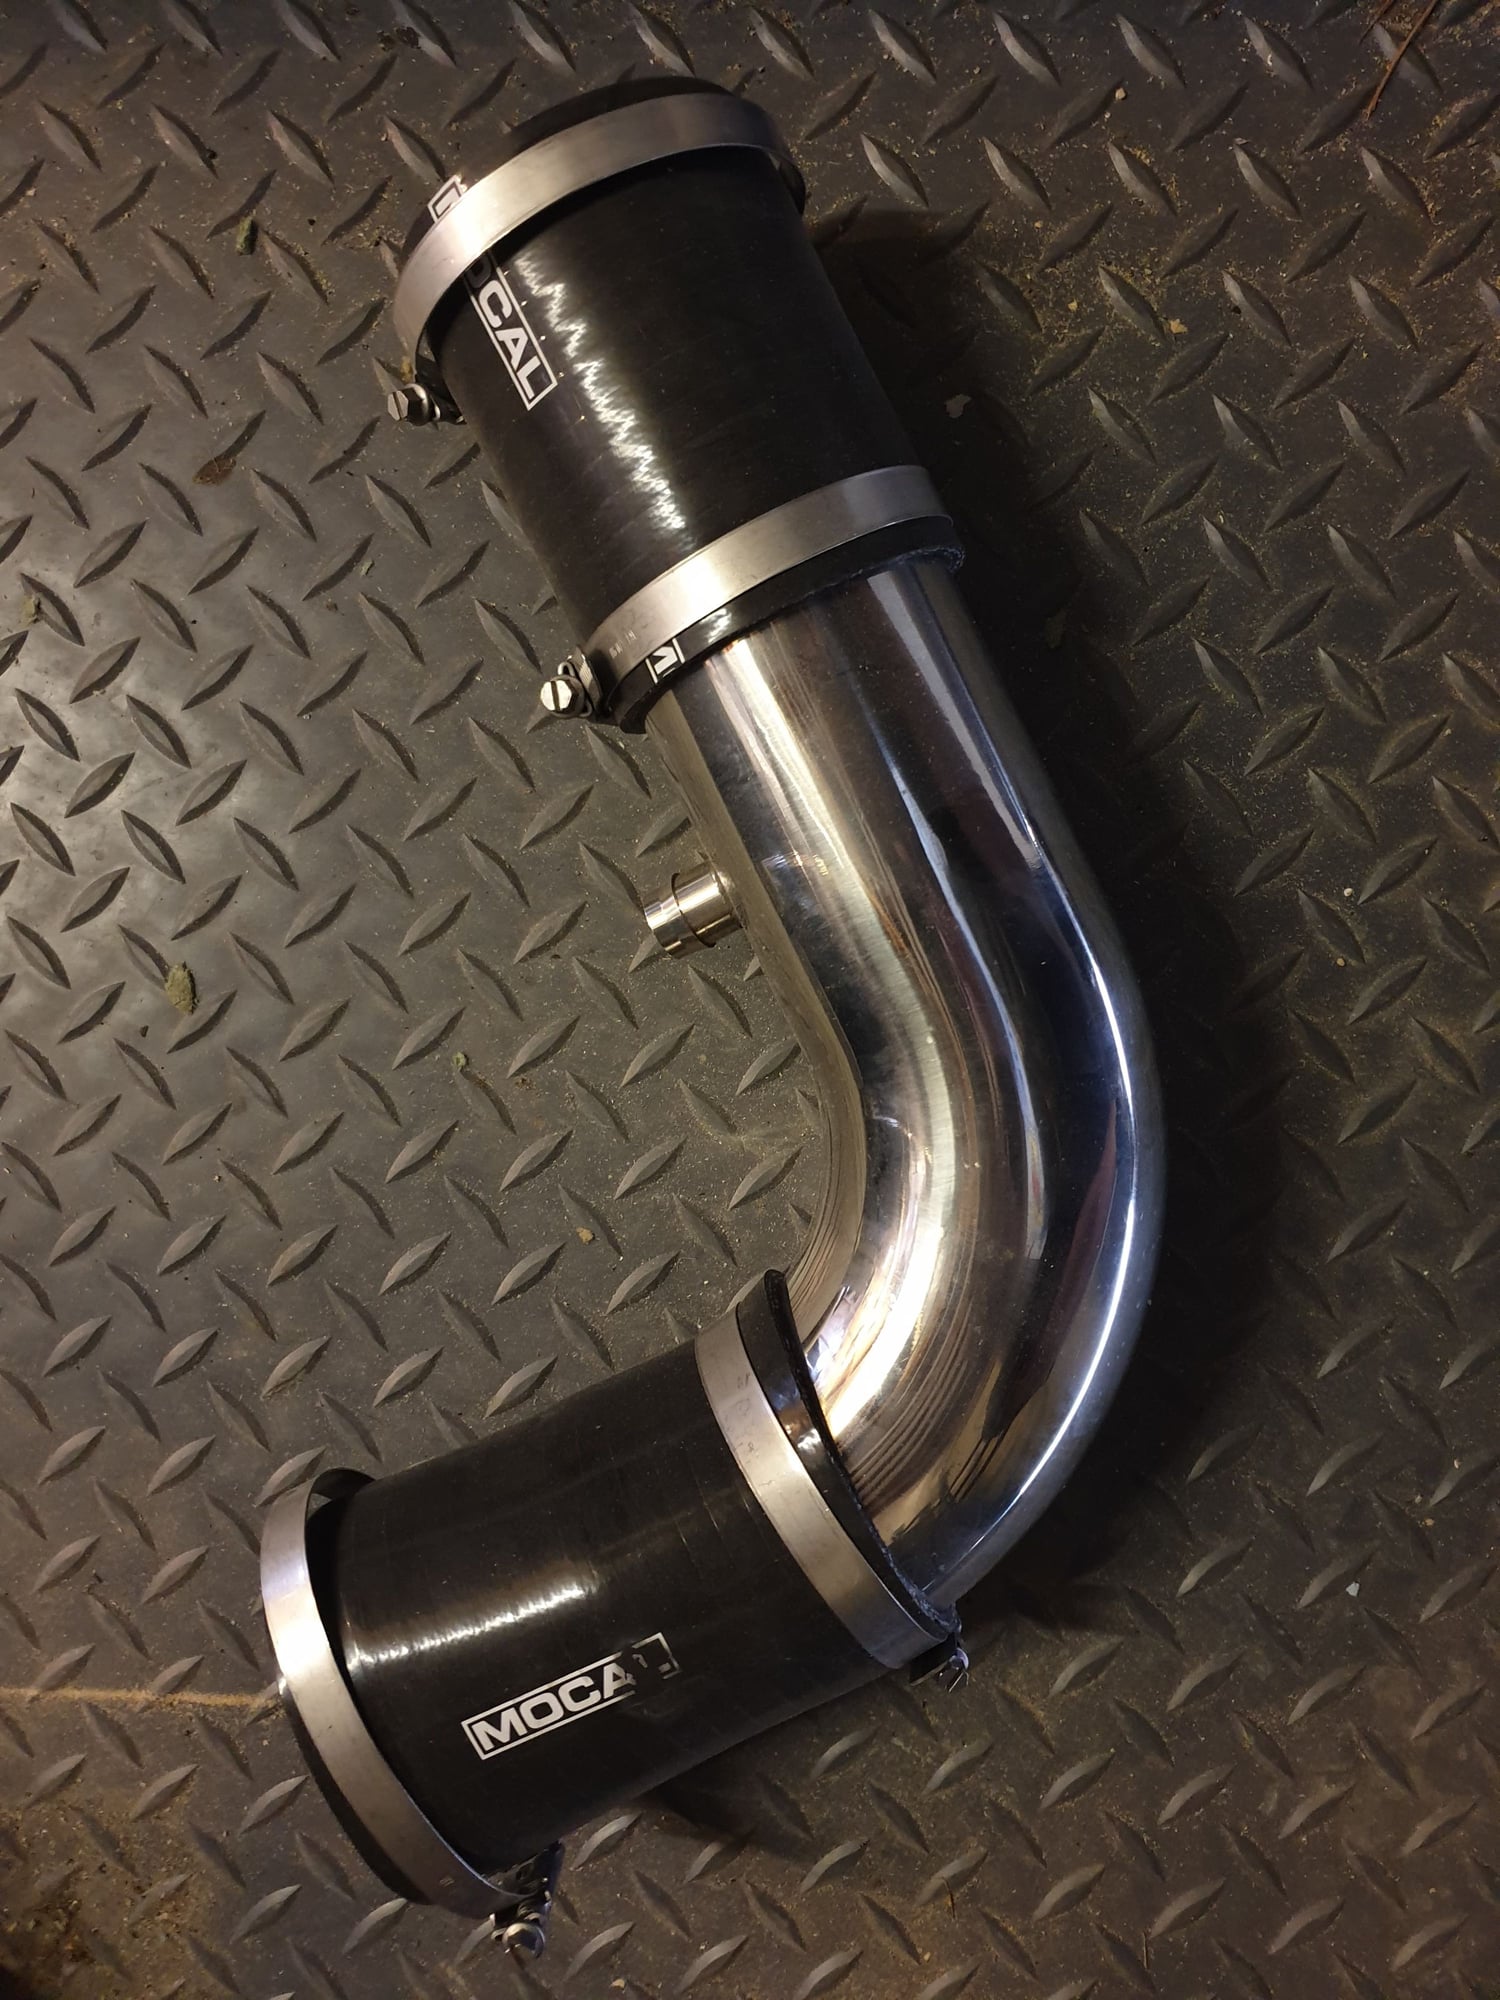 Engine - Intake/Fuel - S Type R Caldoofy Intake Pipe for sale. - Used - 2002 to 2007 Jaguar S-Type - Didcot OX11 8, United Kingdom